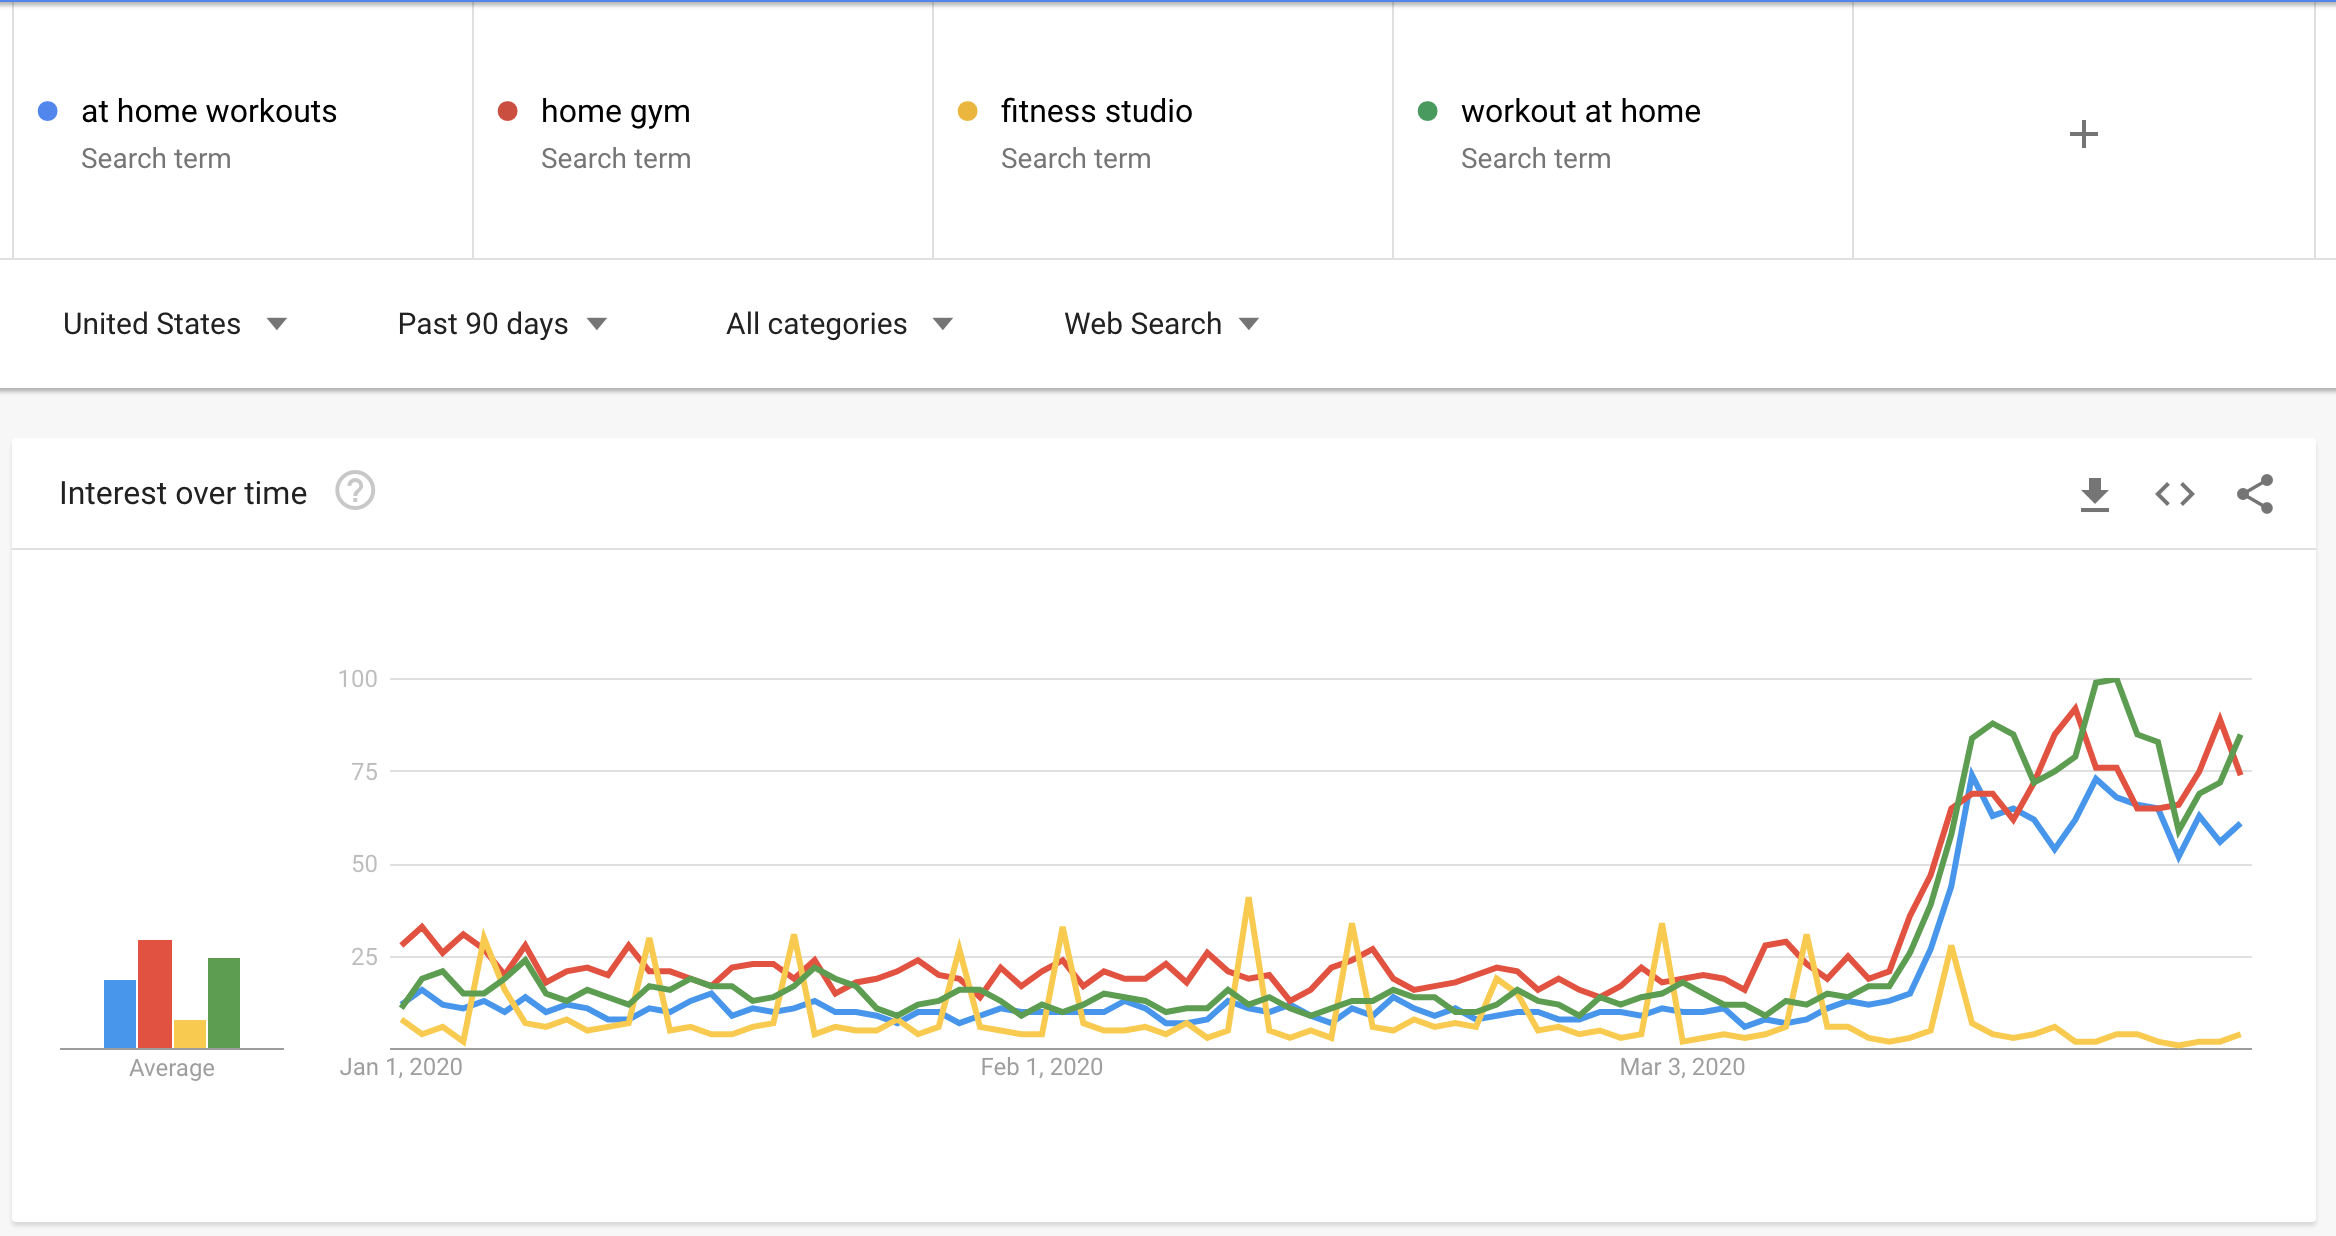 google trends chart showing search interest in at home workout terms